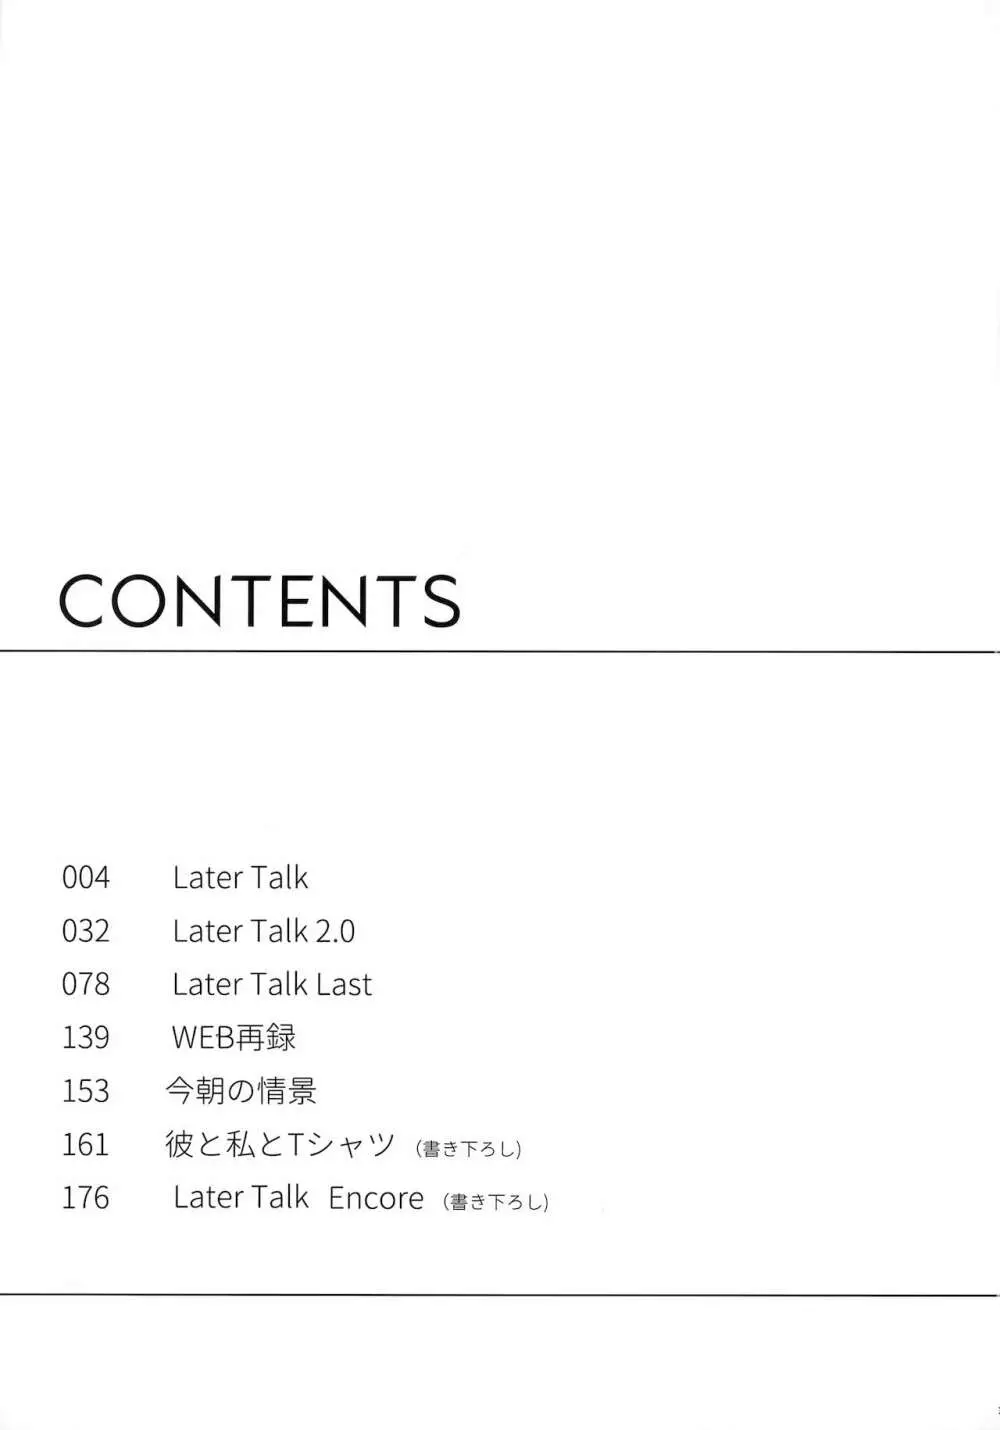 Later Talk Encore Page.5